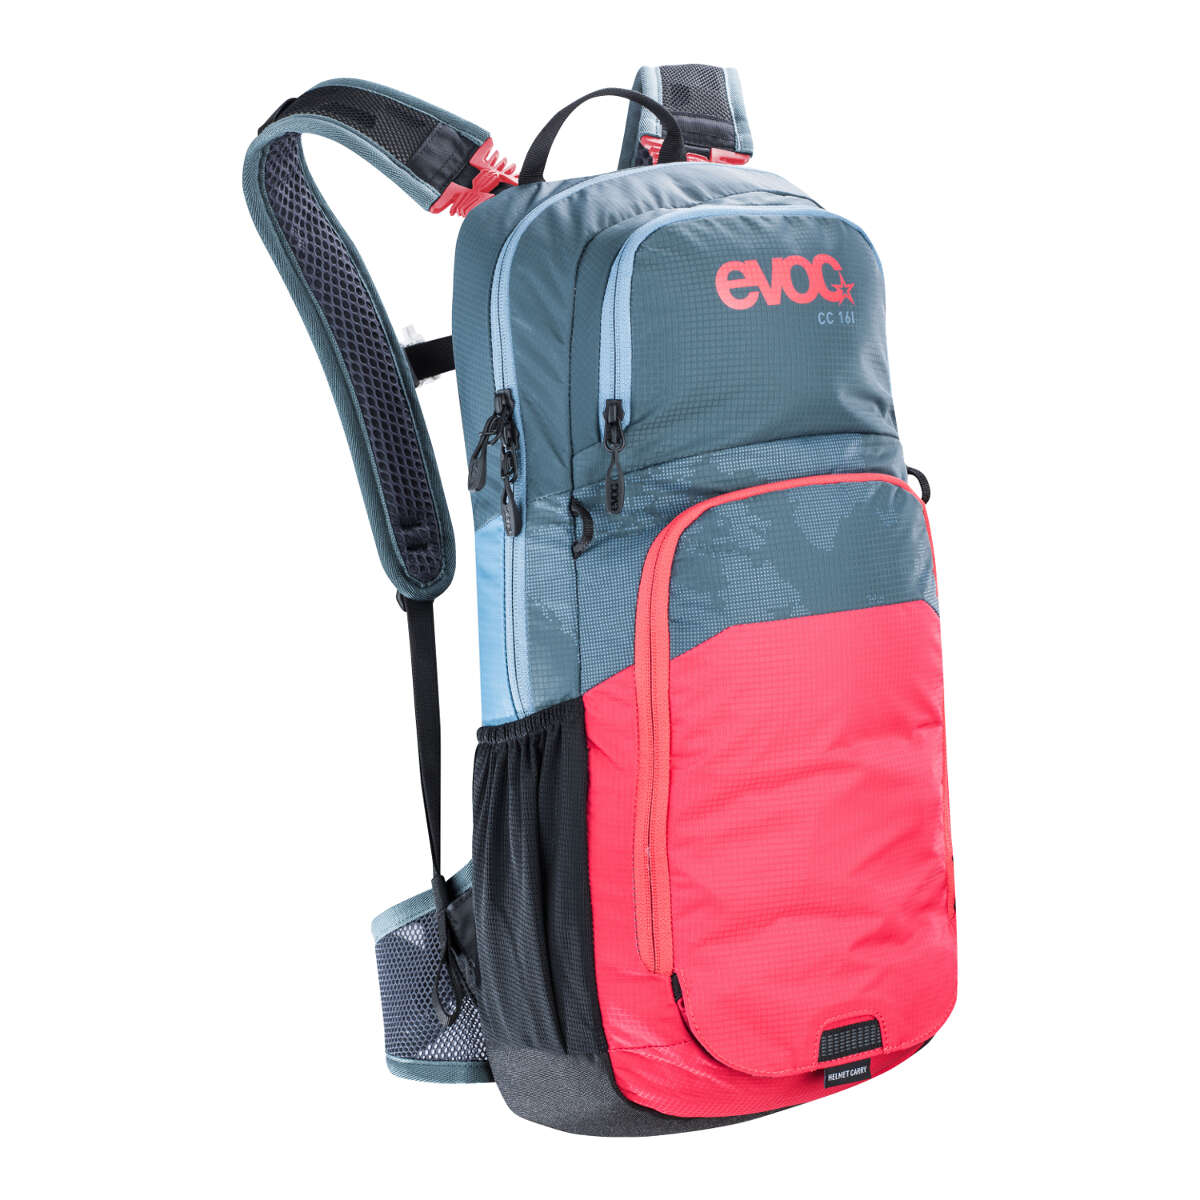 Evoc Backpack with Hydration System Cross Country Slate Red, 16 Liter